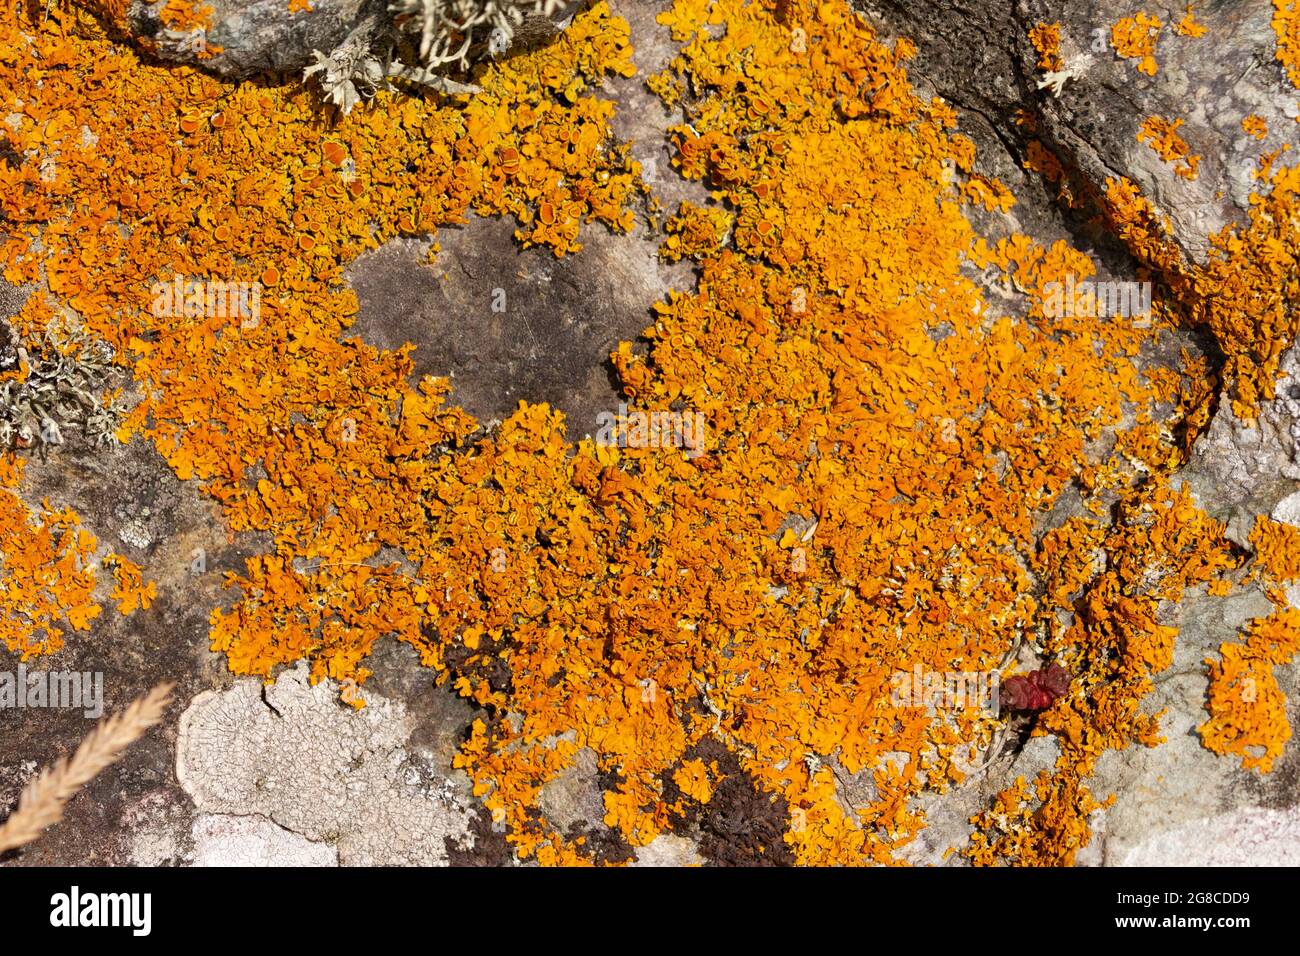 Golden Crust lichen is particularly common in coastal areas, growing on rocks and trees just above the tide line. Stock Photo